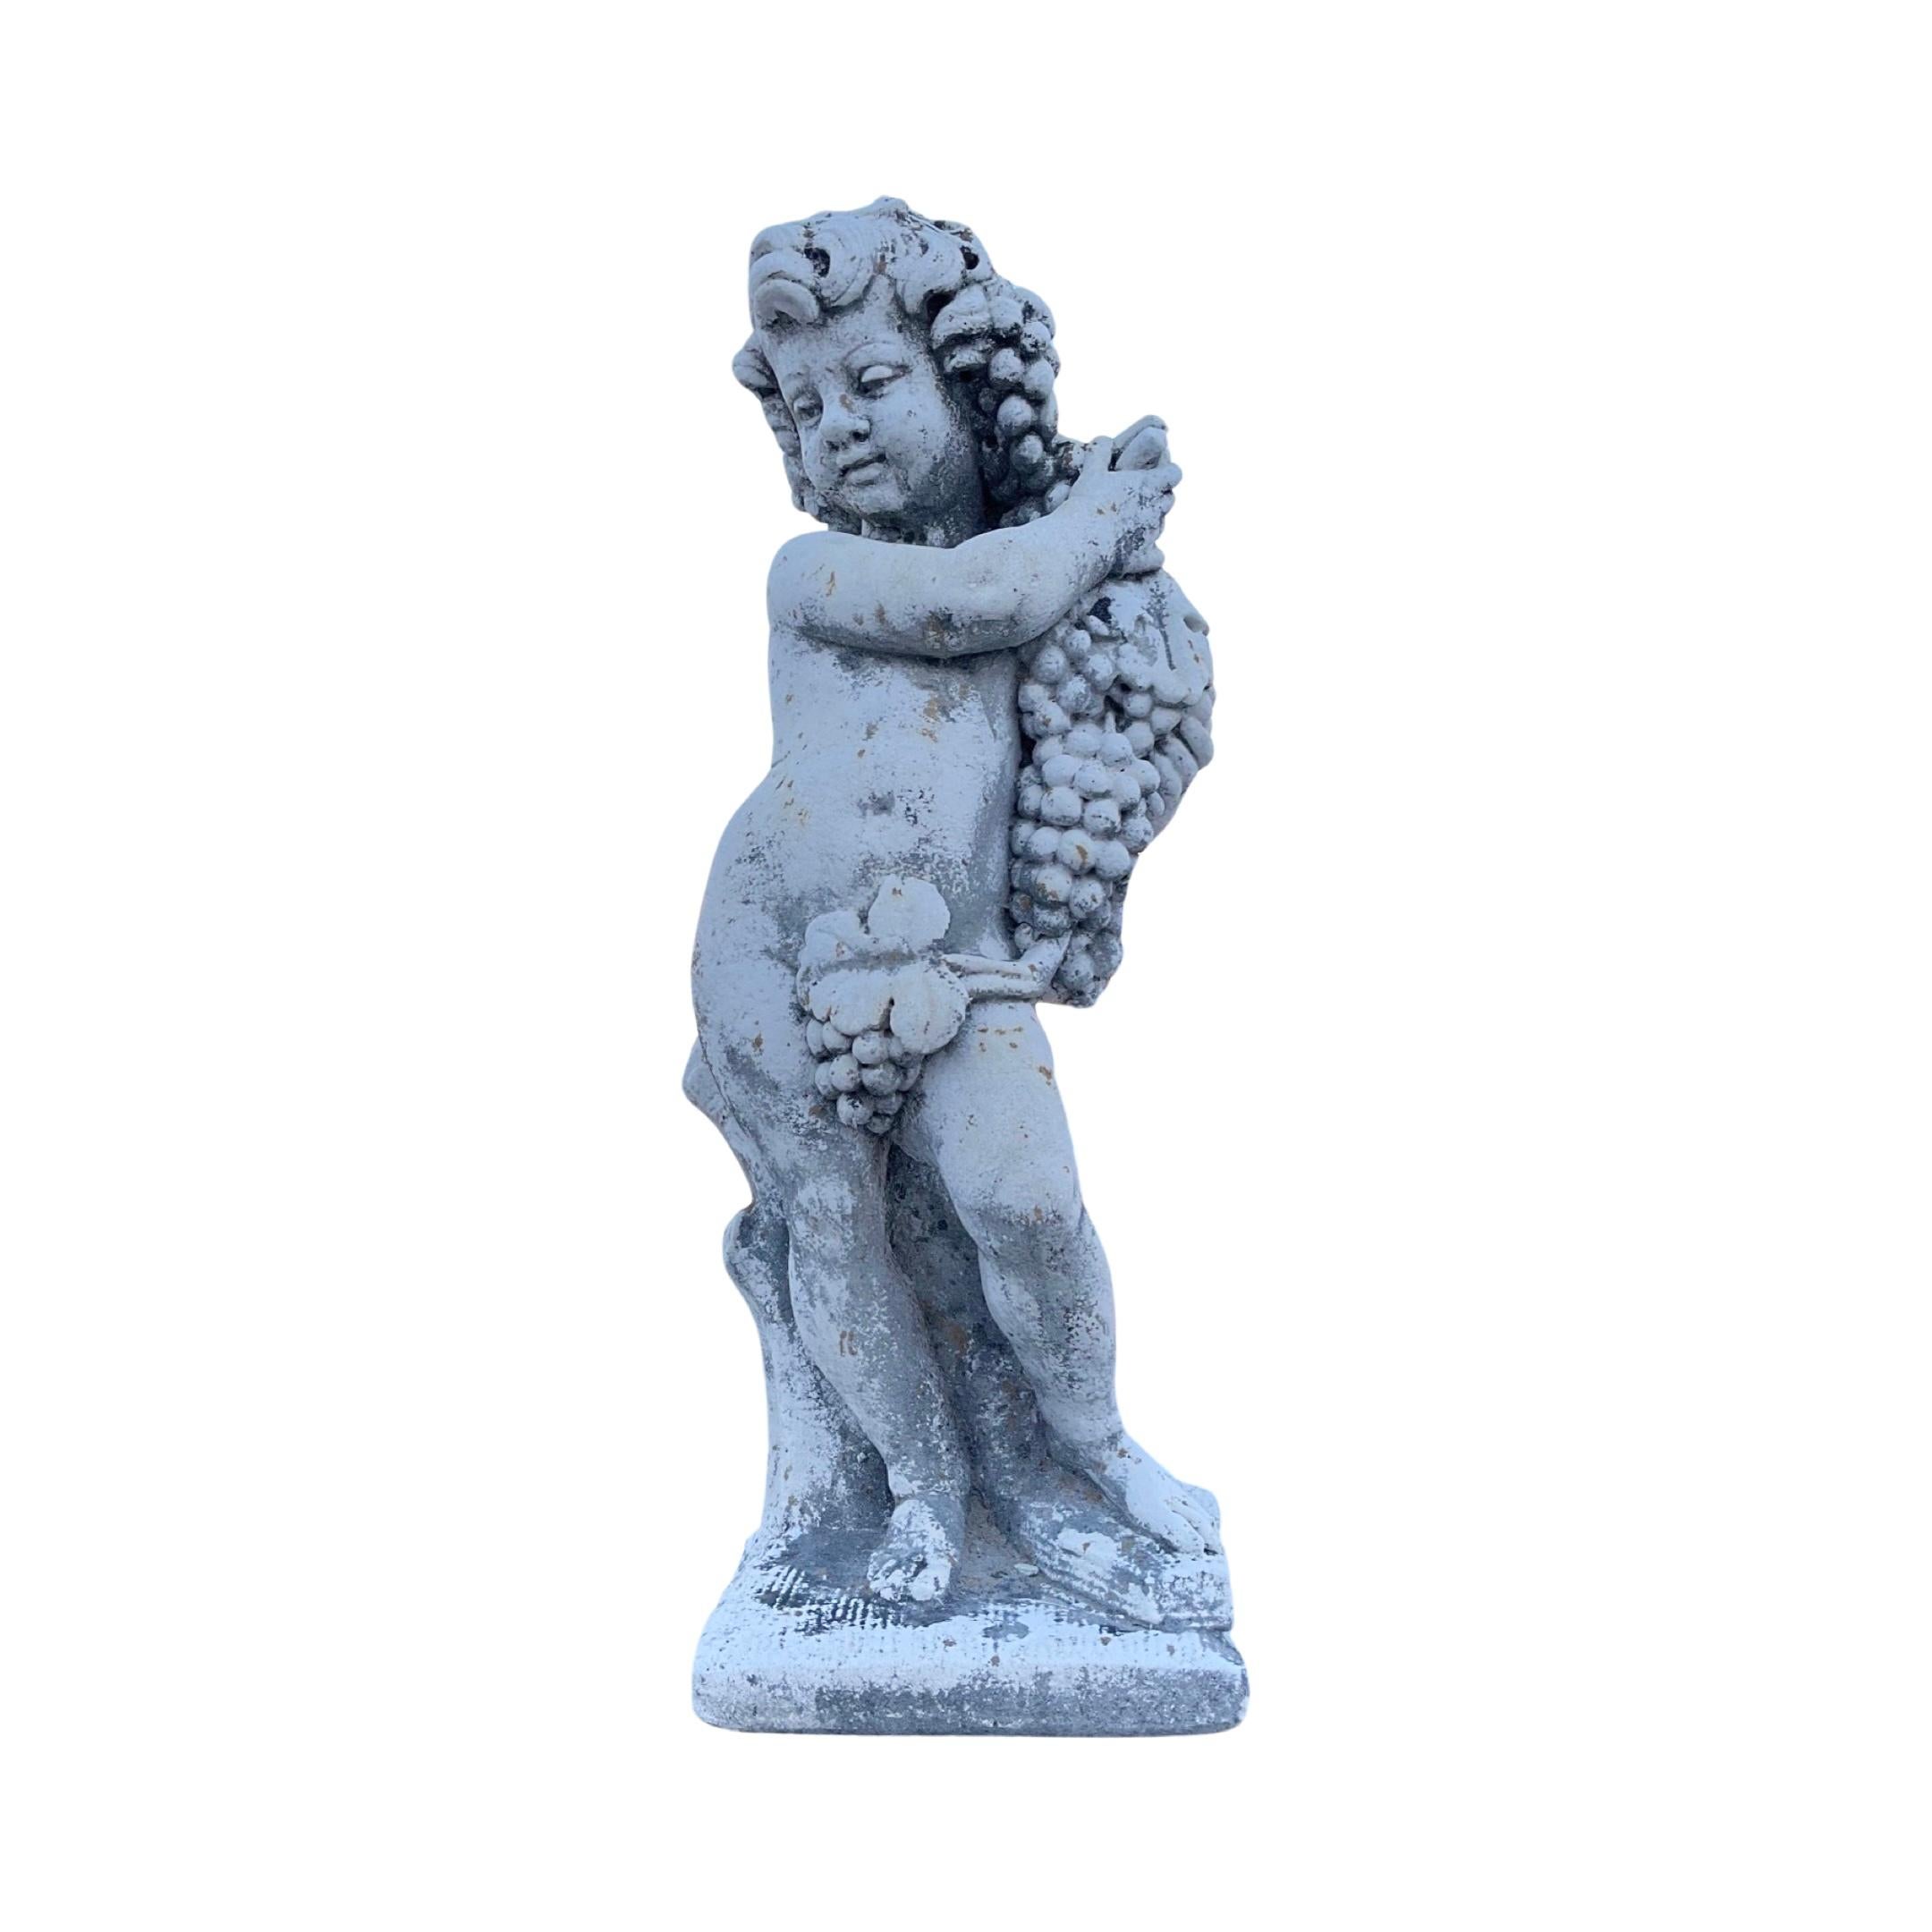 This 18th century French sculpture is made of a durable cement composition and features a lovely cherub figure. Crafted with precision and artistry, this sculpture is a beautiful addition to any collection and a testament to the enduring beauty of